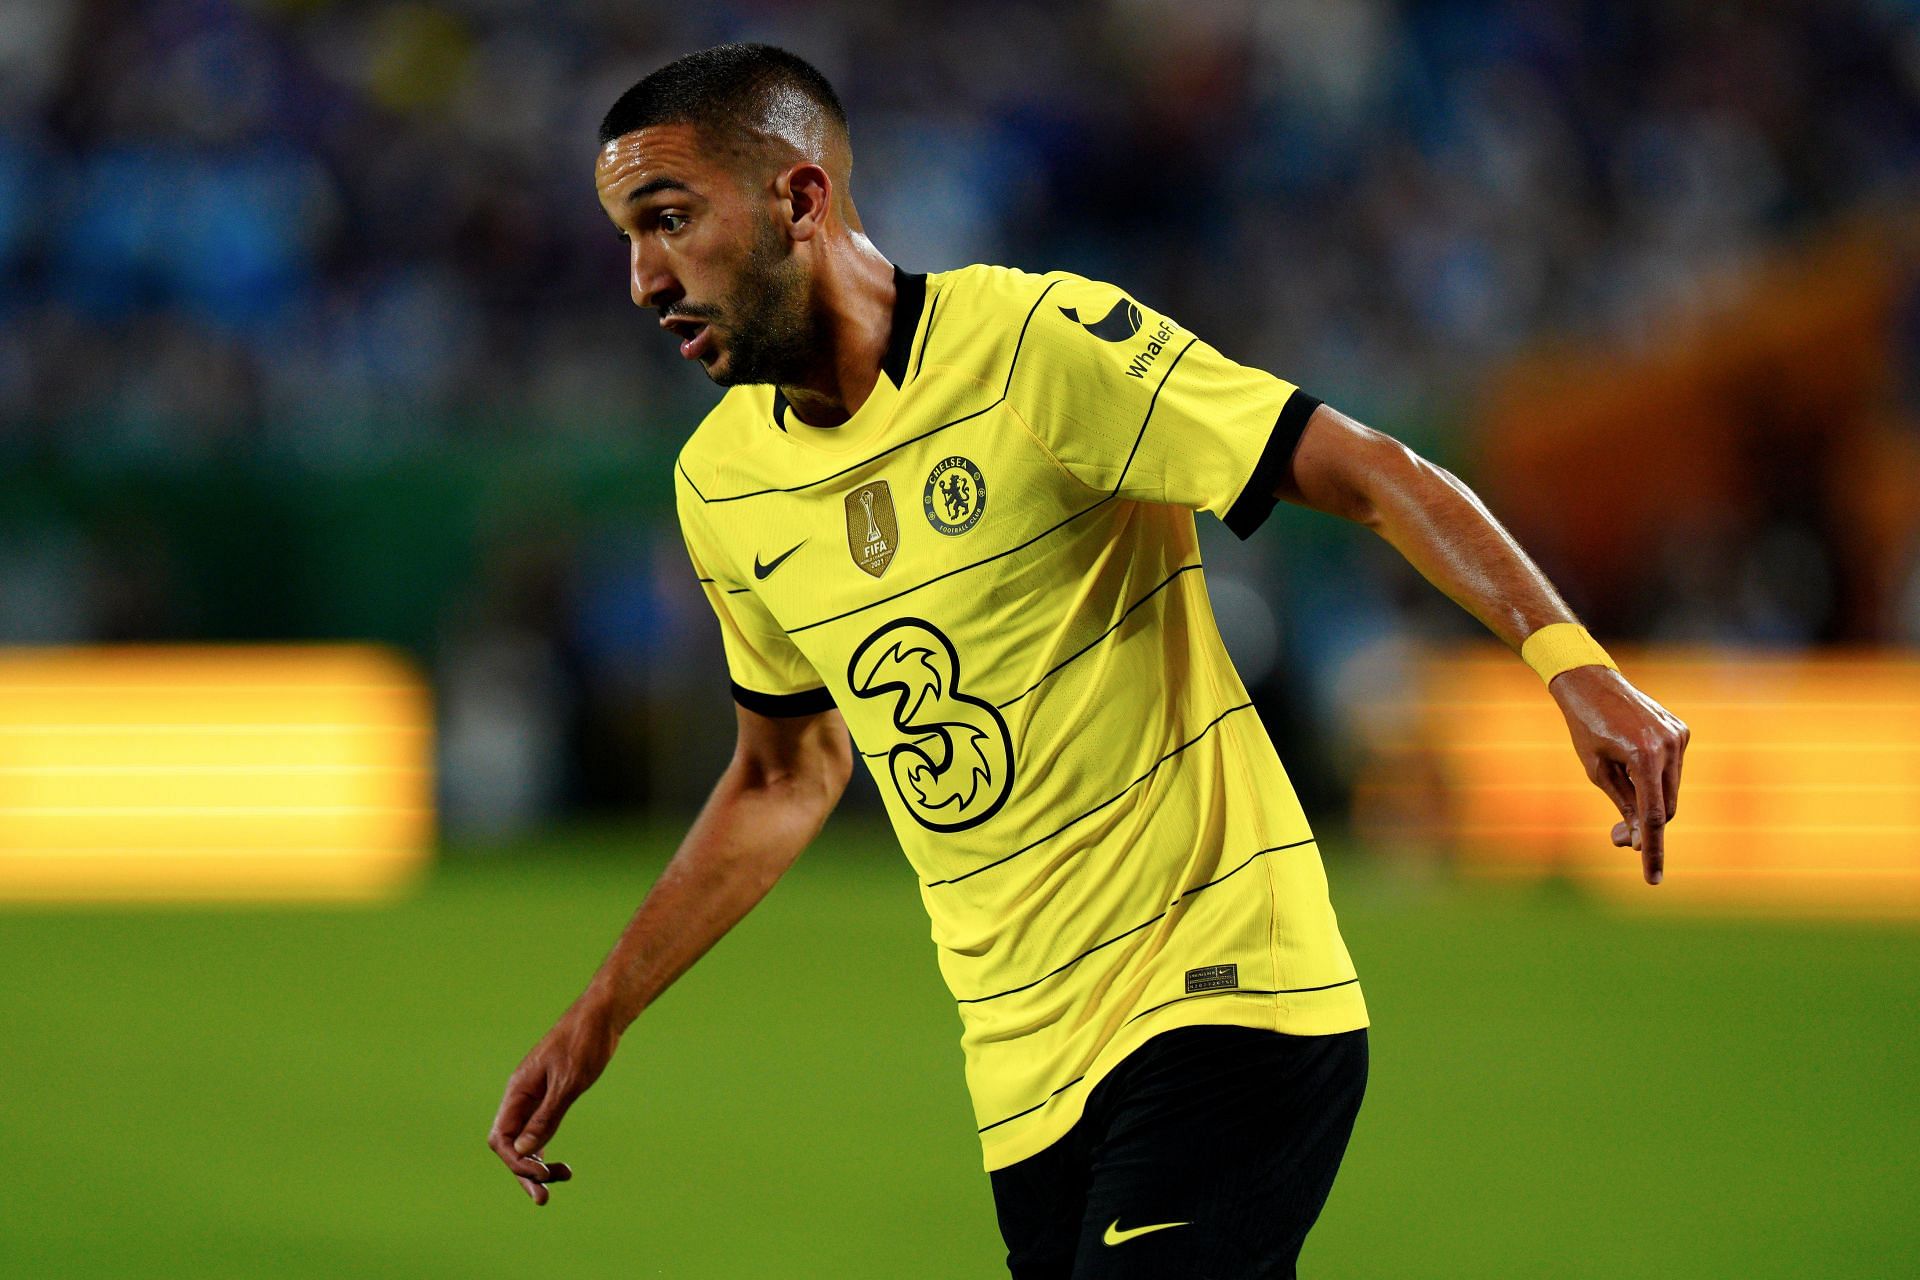 Ziyech has started just one game for Chelsea this season